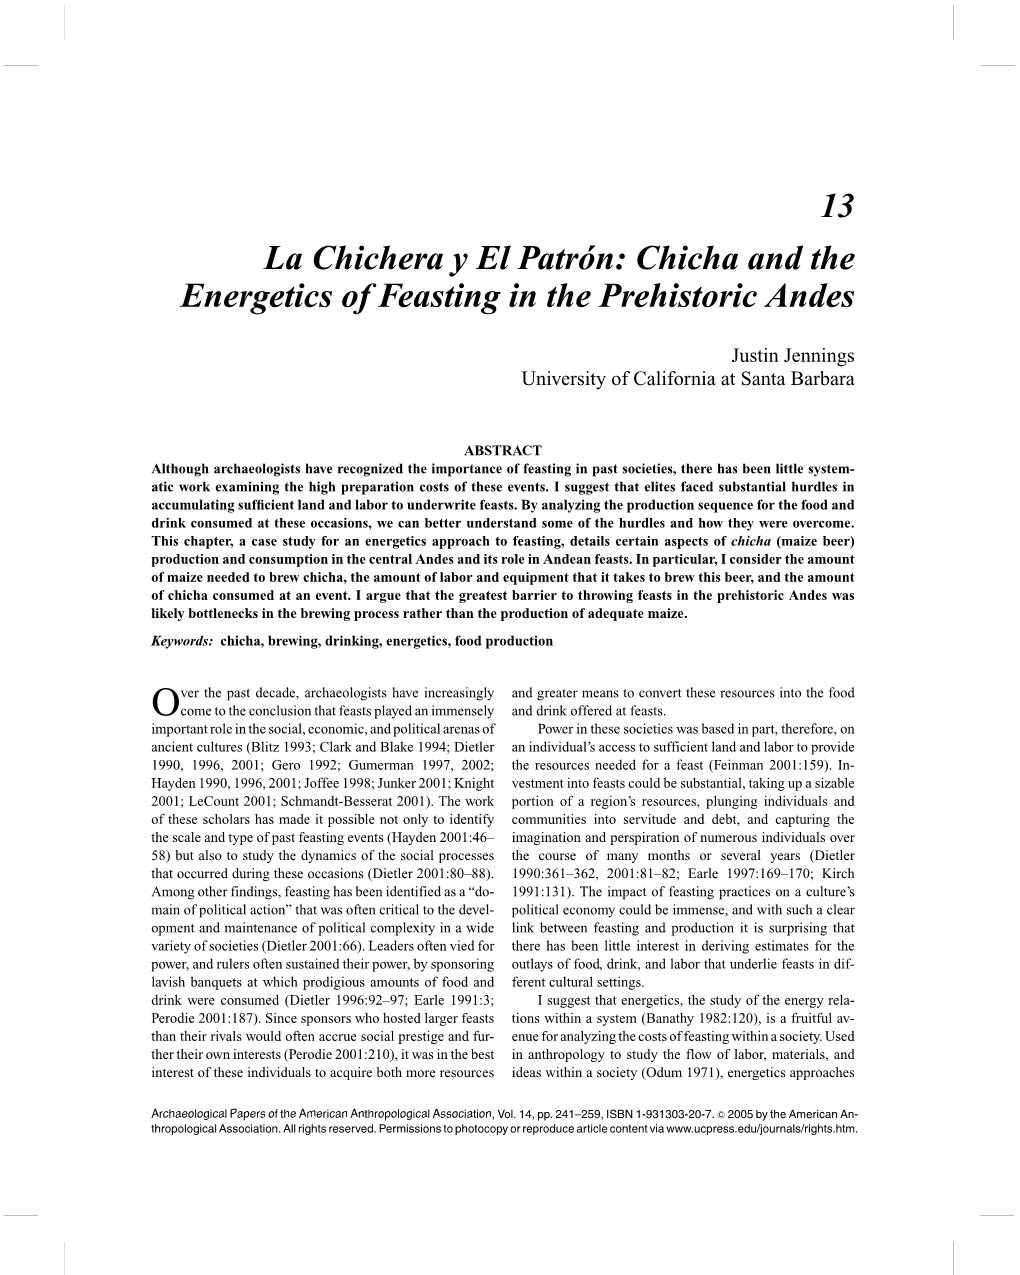 Chicha and the Energetics of Feasting in the Prehistoric Andes